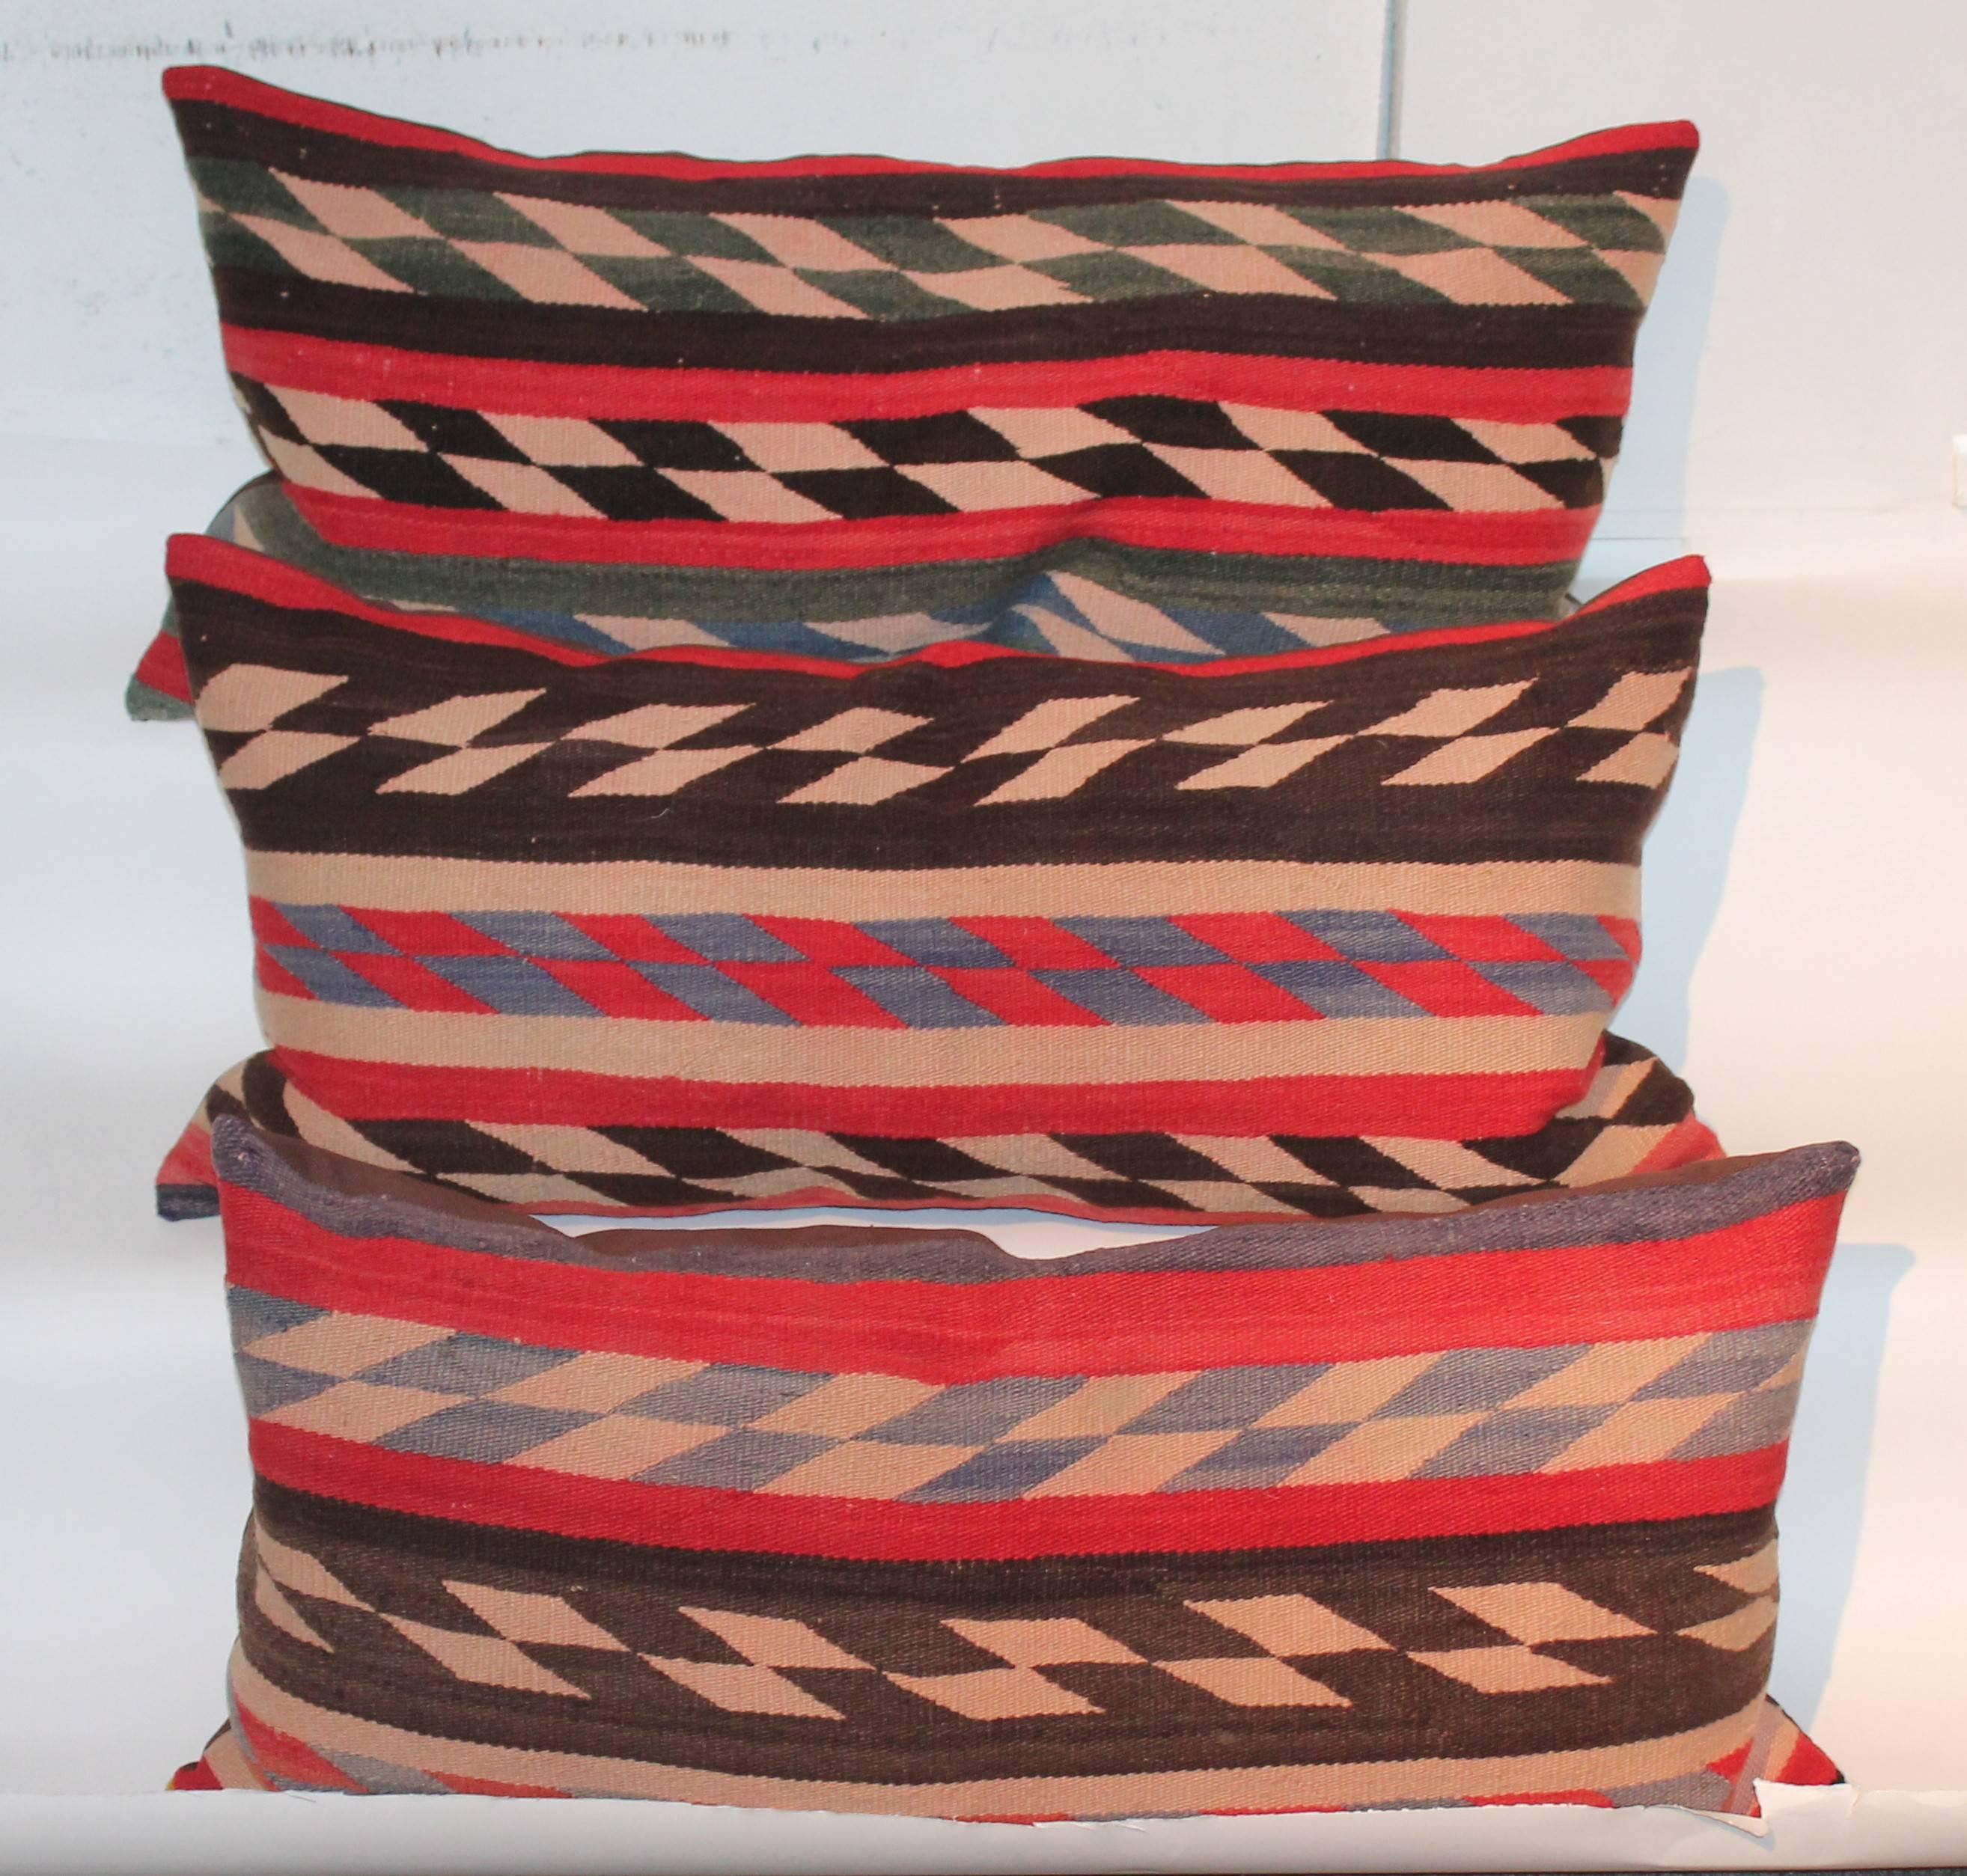 This fine group of Navajo weaving pillows are from an early Navajo saddle blanket. The condition are good with minor fading through out. The colors are amazing. Sold as a group for 1895 or 895. each.